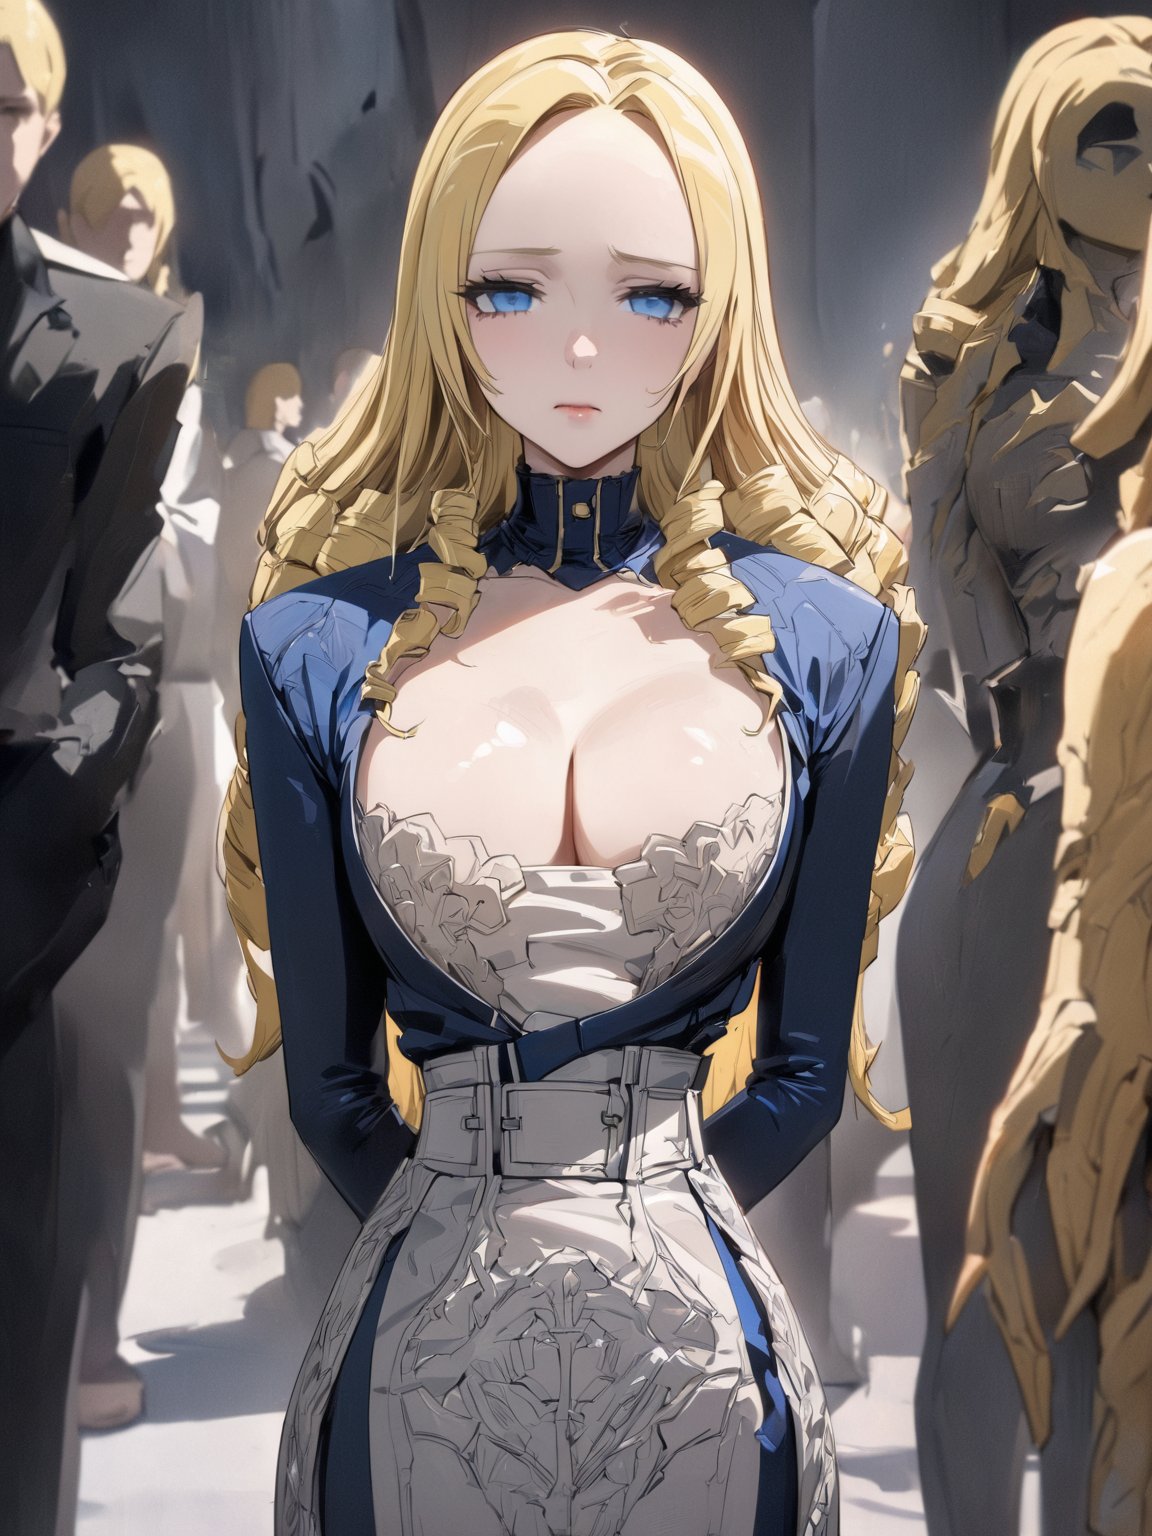 //Quality,
masterpiece, best quality, detailed
,//Character,
1girl, solo
,//Fashion,
,//Background,
,//Others,
solution epsilon \(overlord\), 1girl, blue eyes, long hair, blonde hair, breats